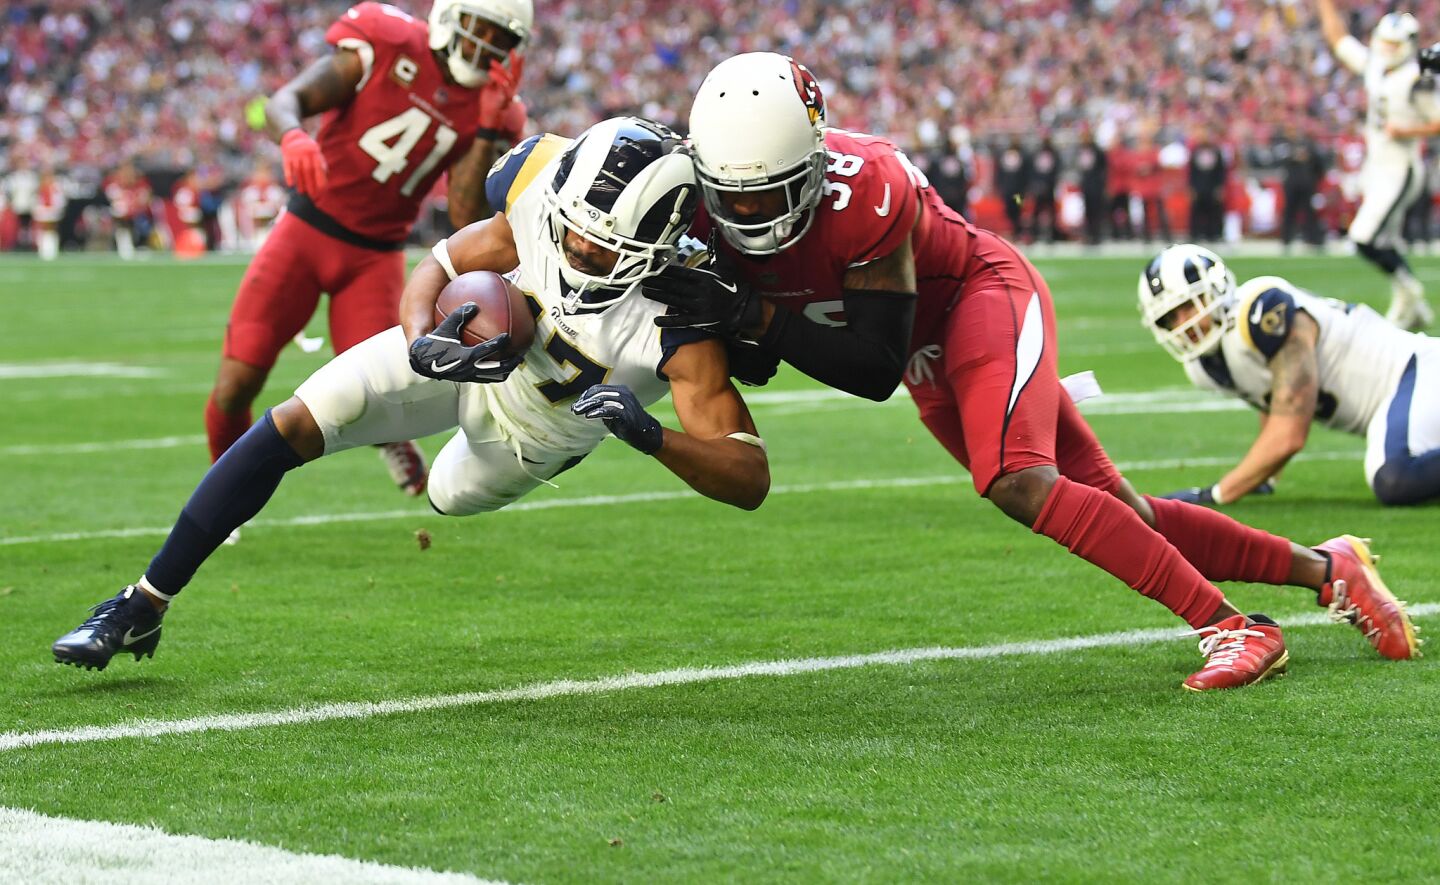 Rams wide receiver Robert Woods beats Arizona Cardinals conrerback David Amerson to the end zone for a touchdown in the first quarter at State Farm Stadium on Sunday.